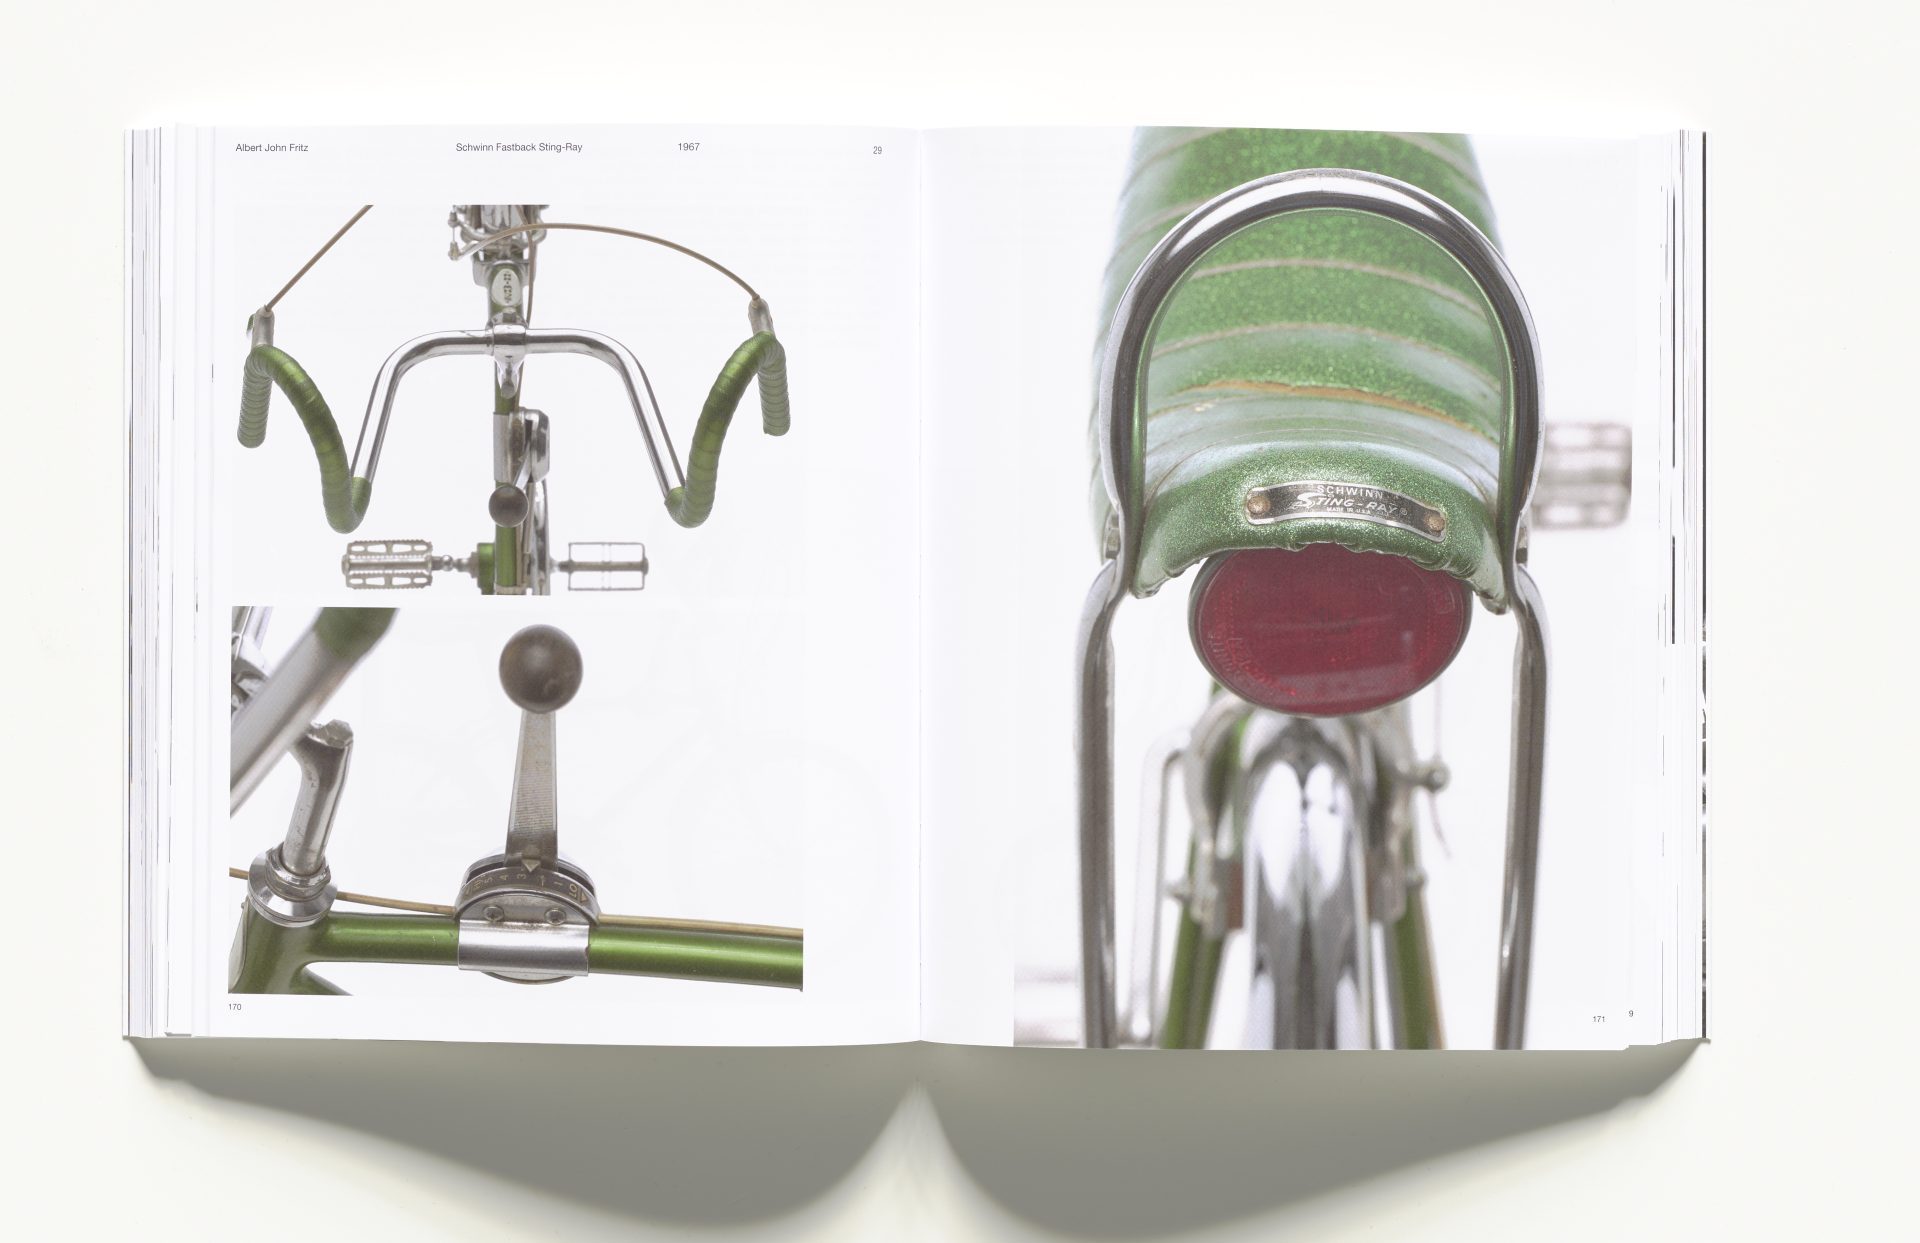 Photo shows an open exhibition catalogue with close-ups of a green bicycle.